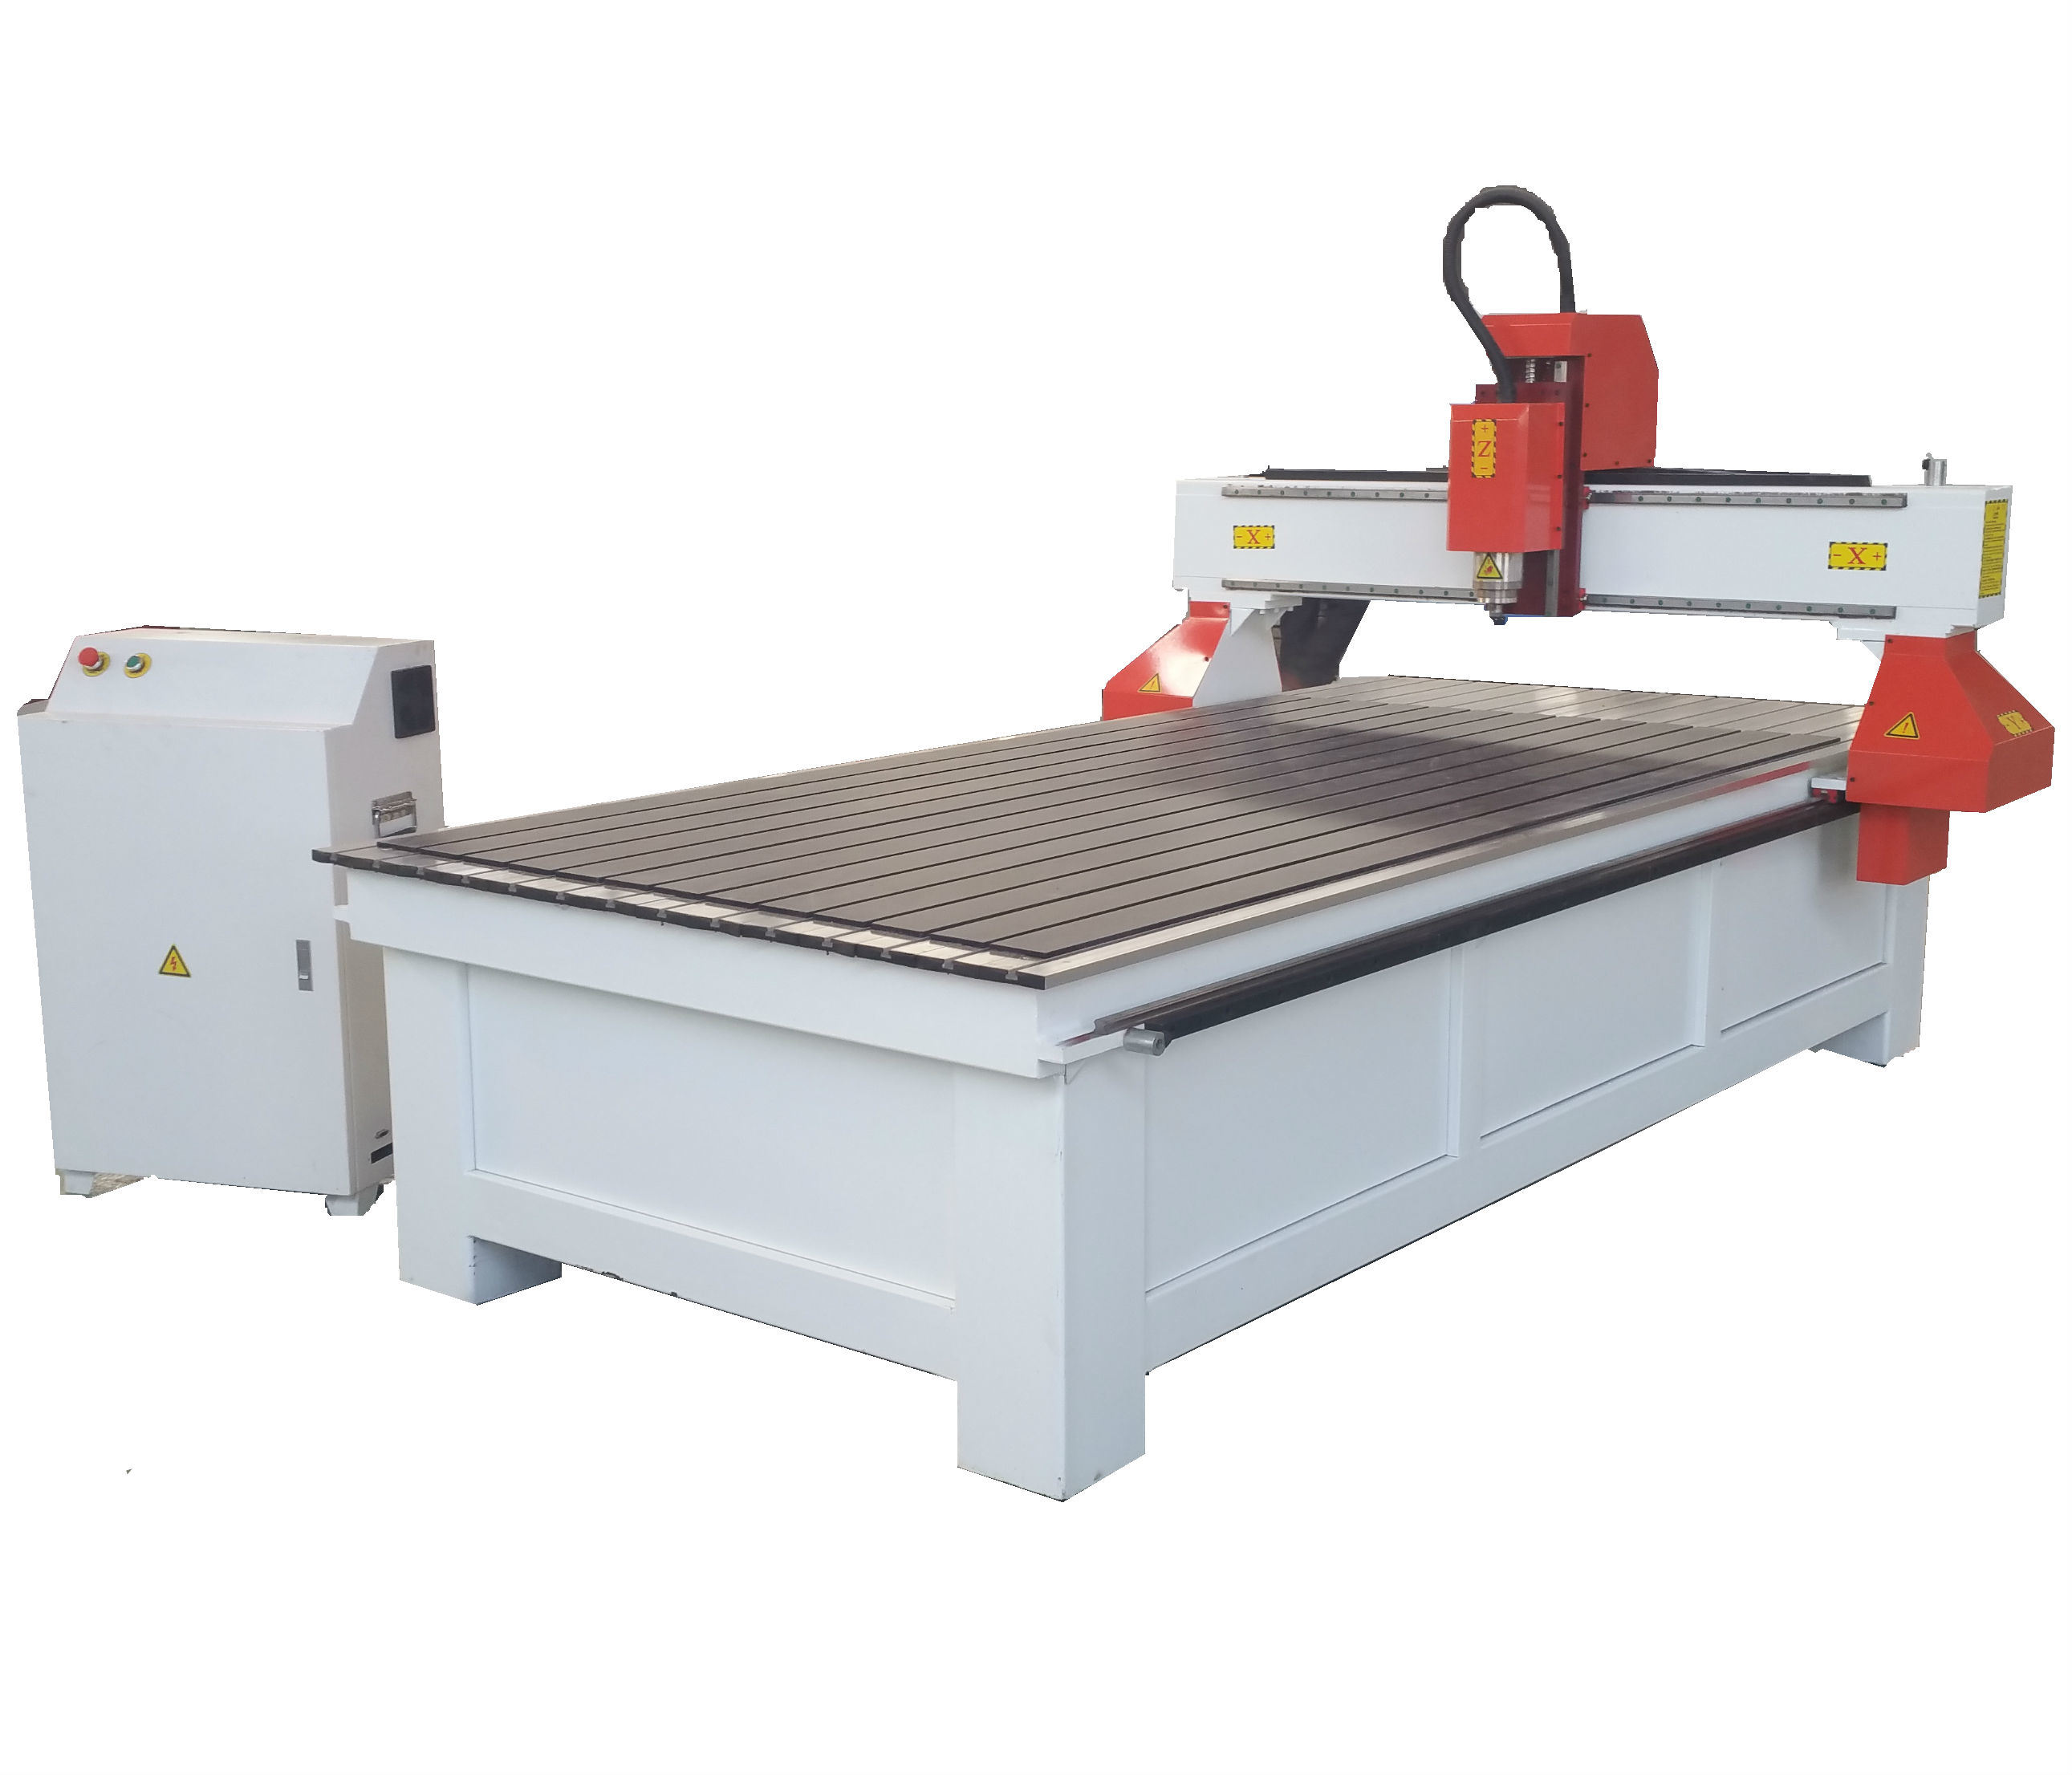 Lowest CNC Router machinery with Rotary for Engraving/Cutting/Milling/Drilling Wood/Plastic/PE/Acrylic Plank